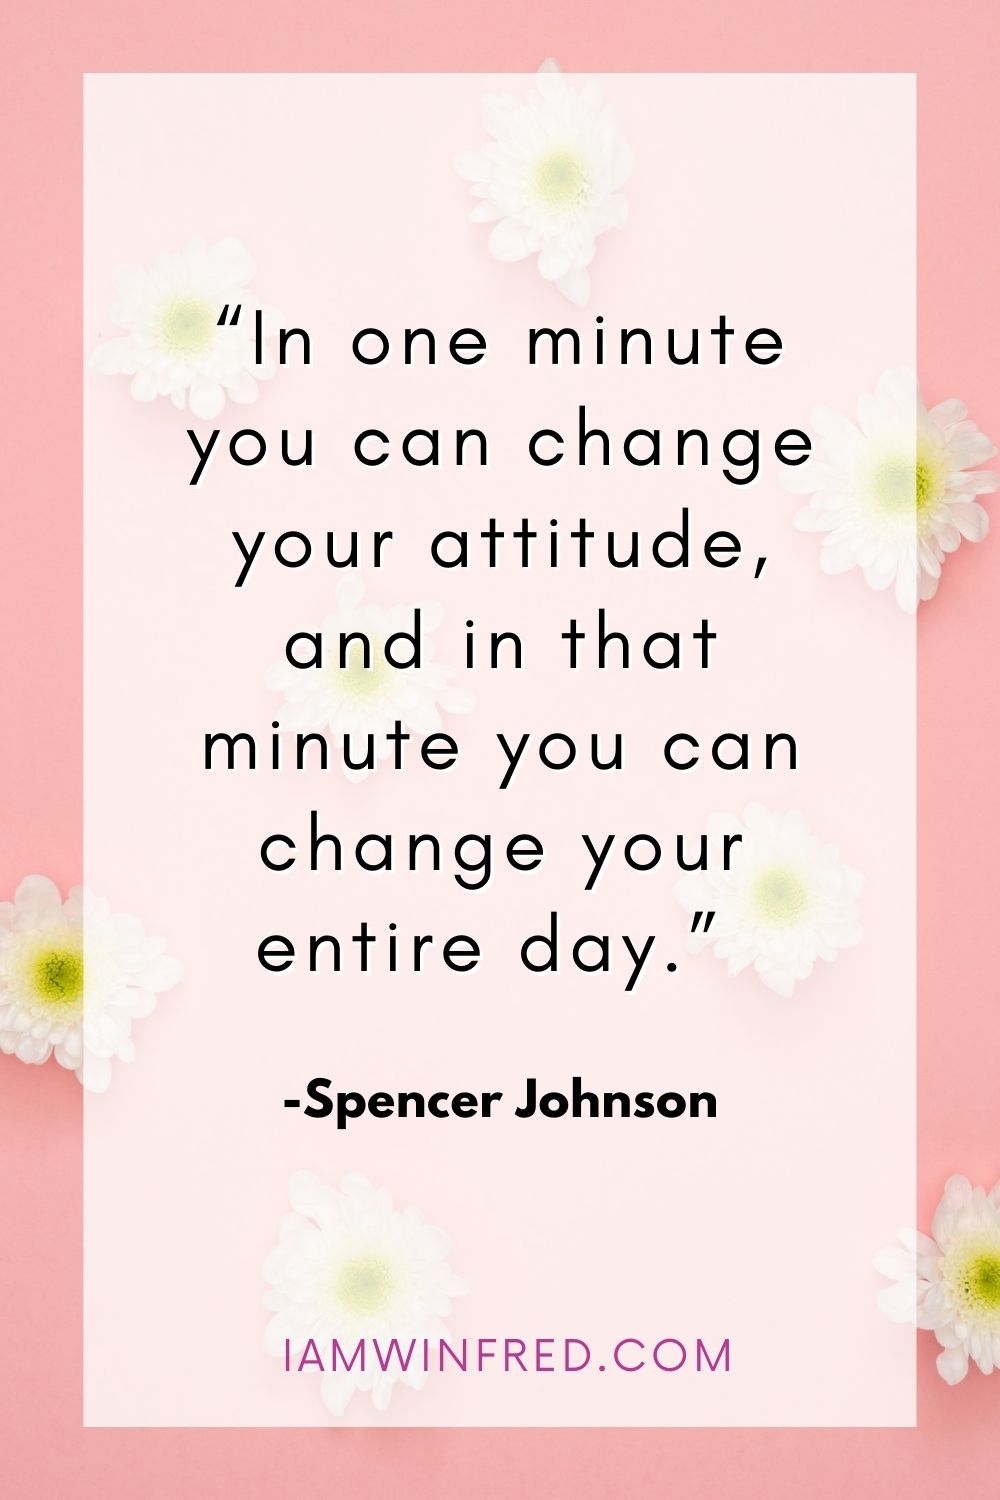 In One Minute You Can Change Your Attitude And In That Minute You Can Change Your Entire Day.